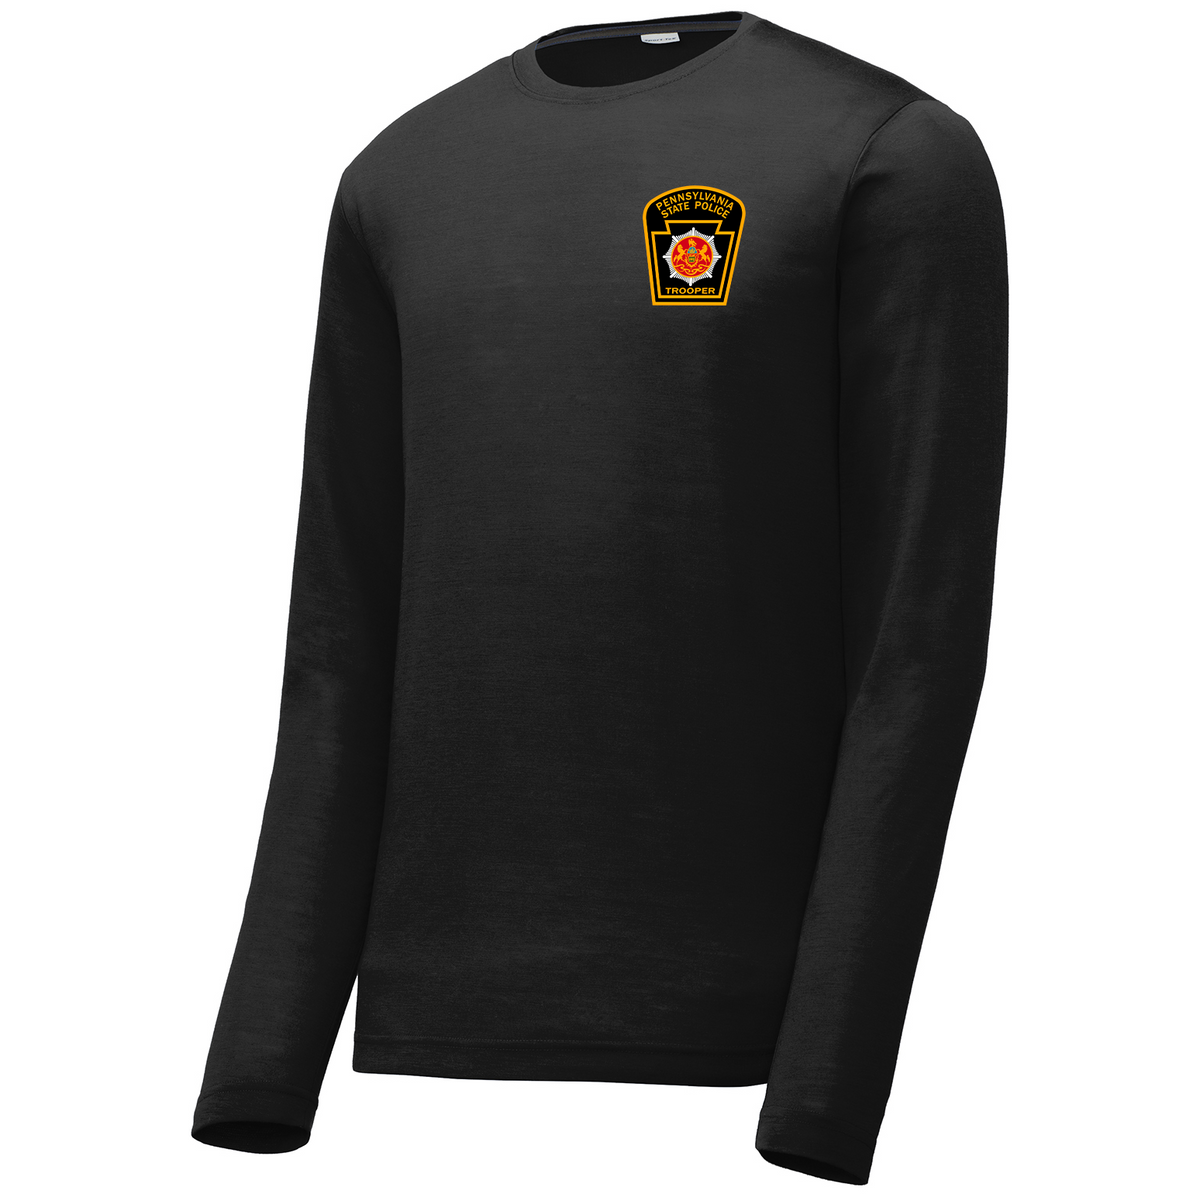 PA State Police Long Sleeve CottonTouch Performance Shirt